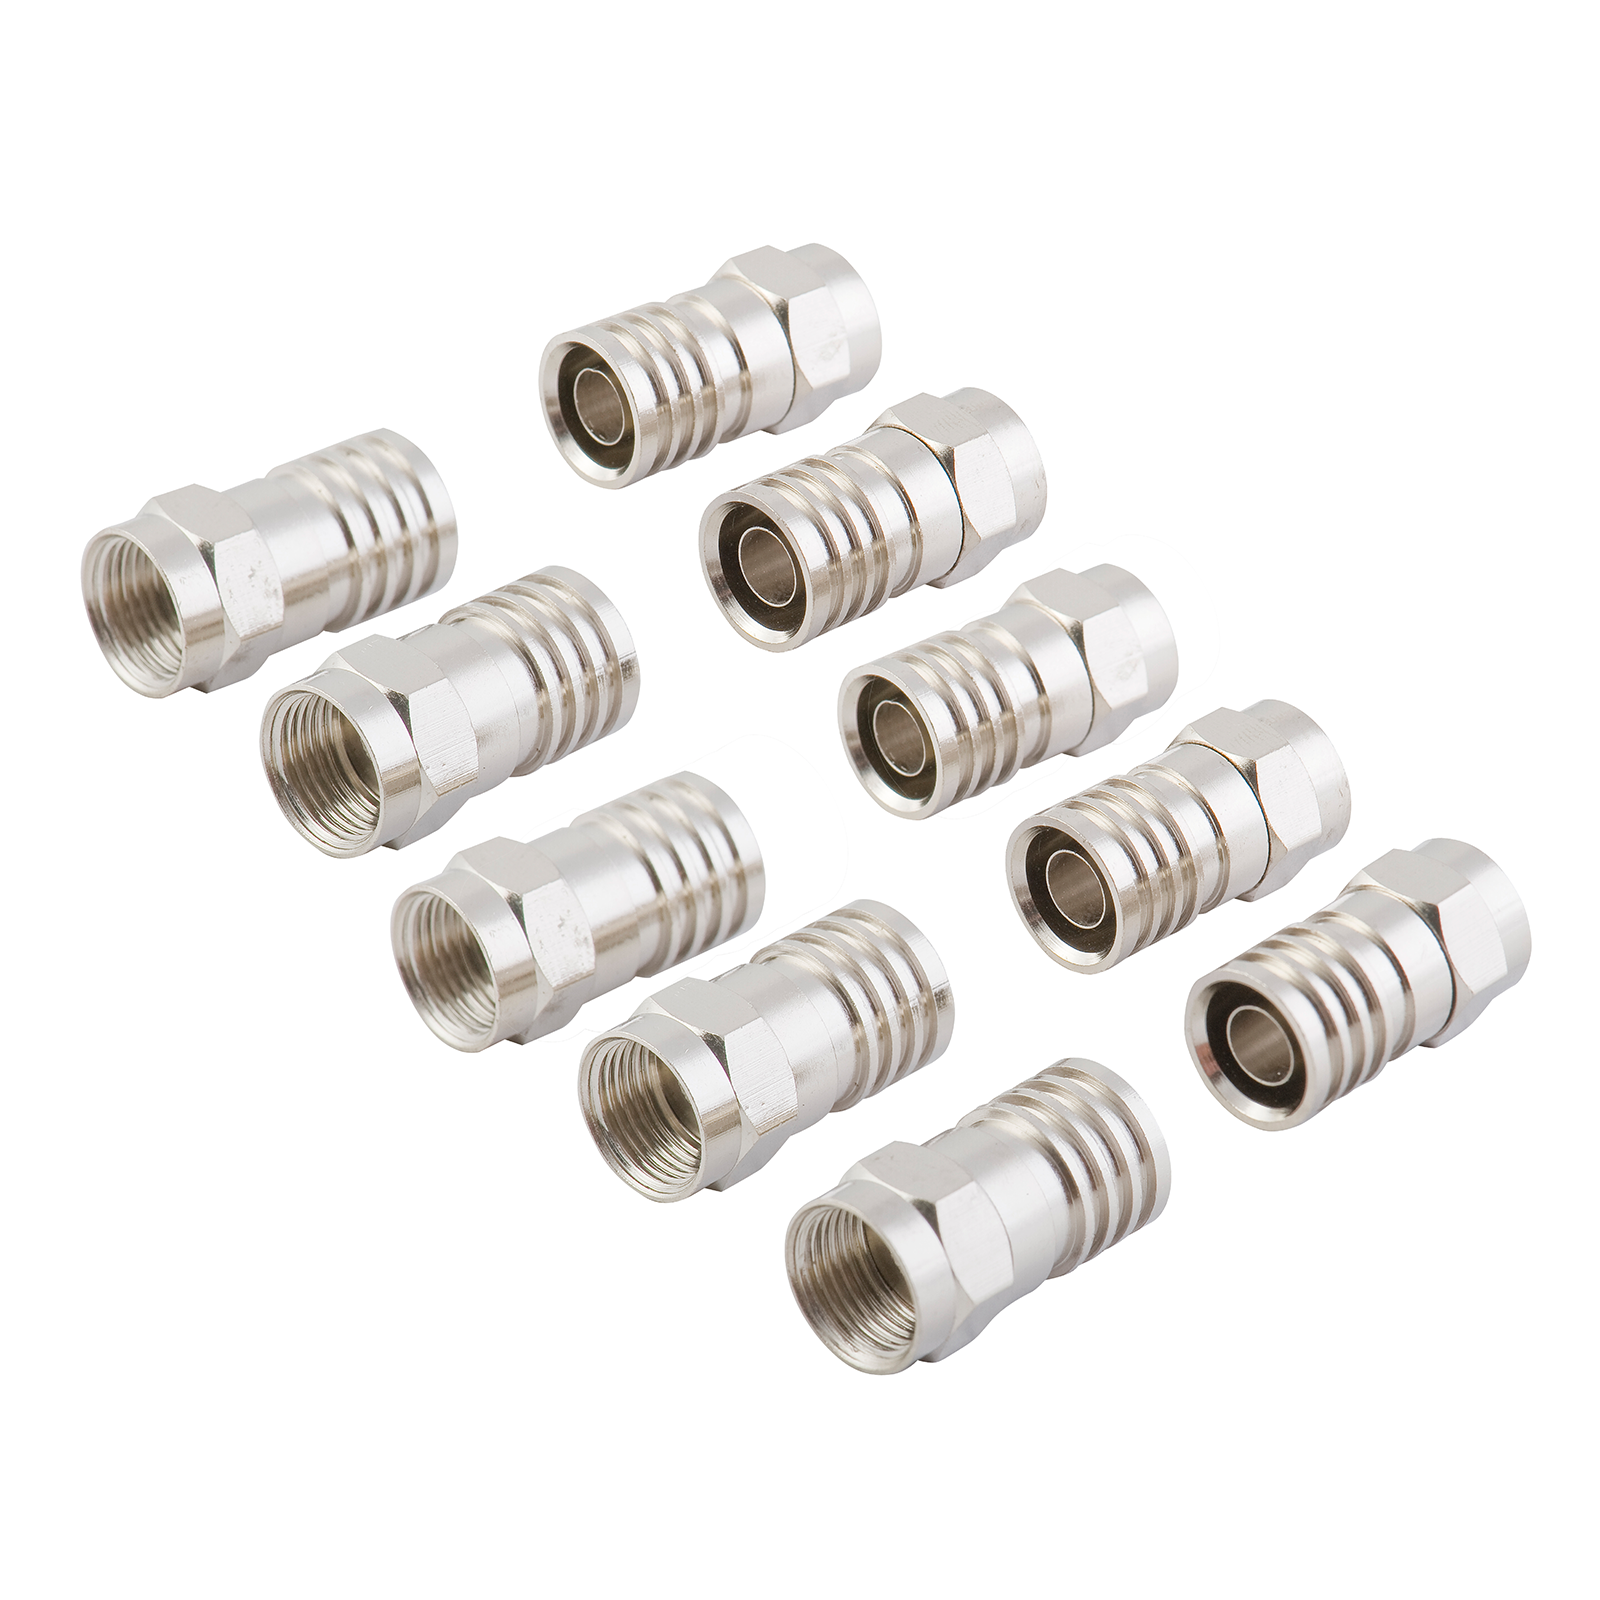 F59 Crimp Connector for RG6 Cable Heavy Gauge - 10 Pack